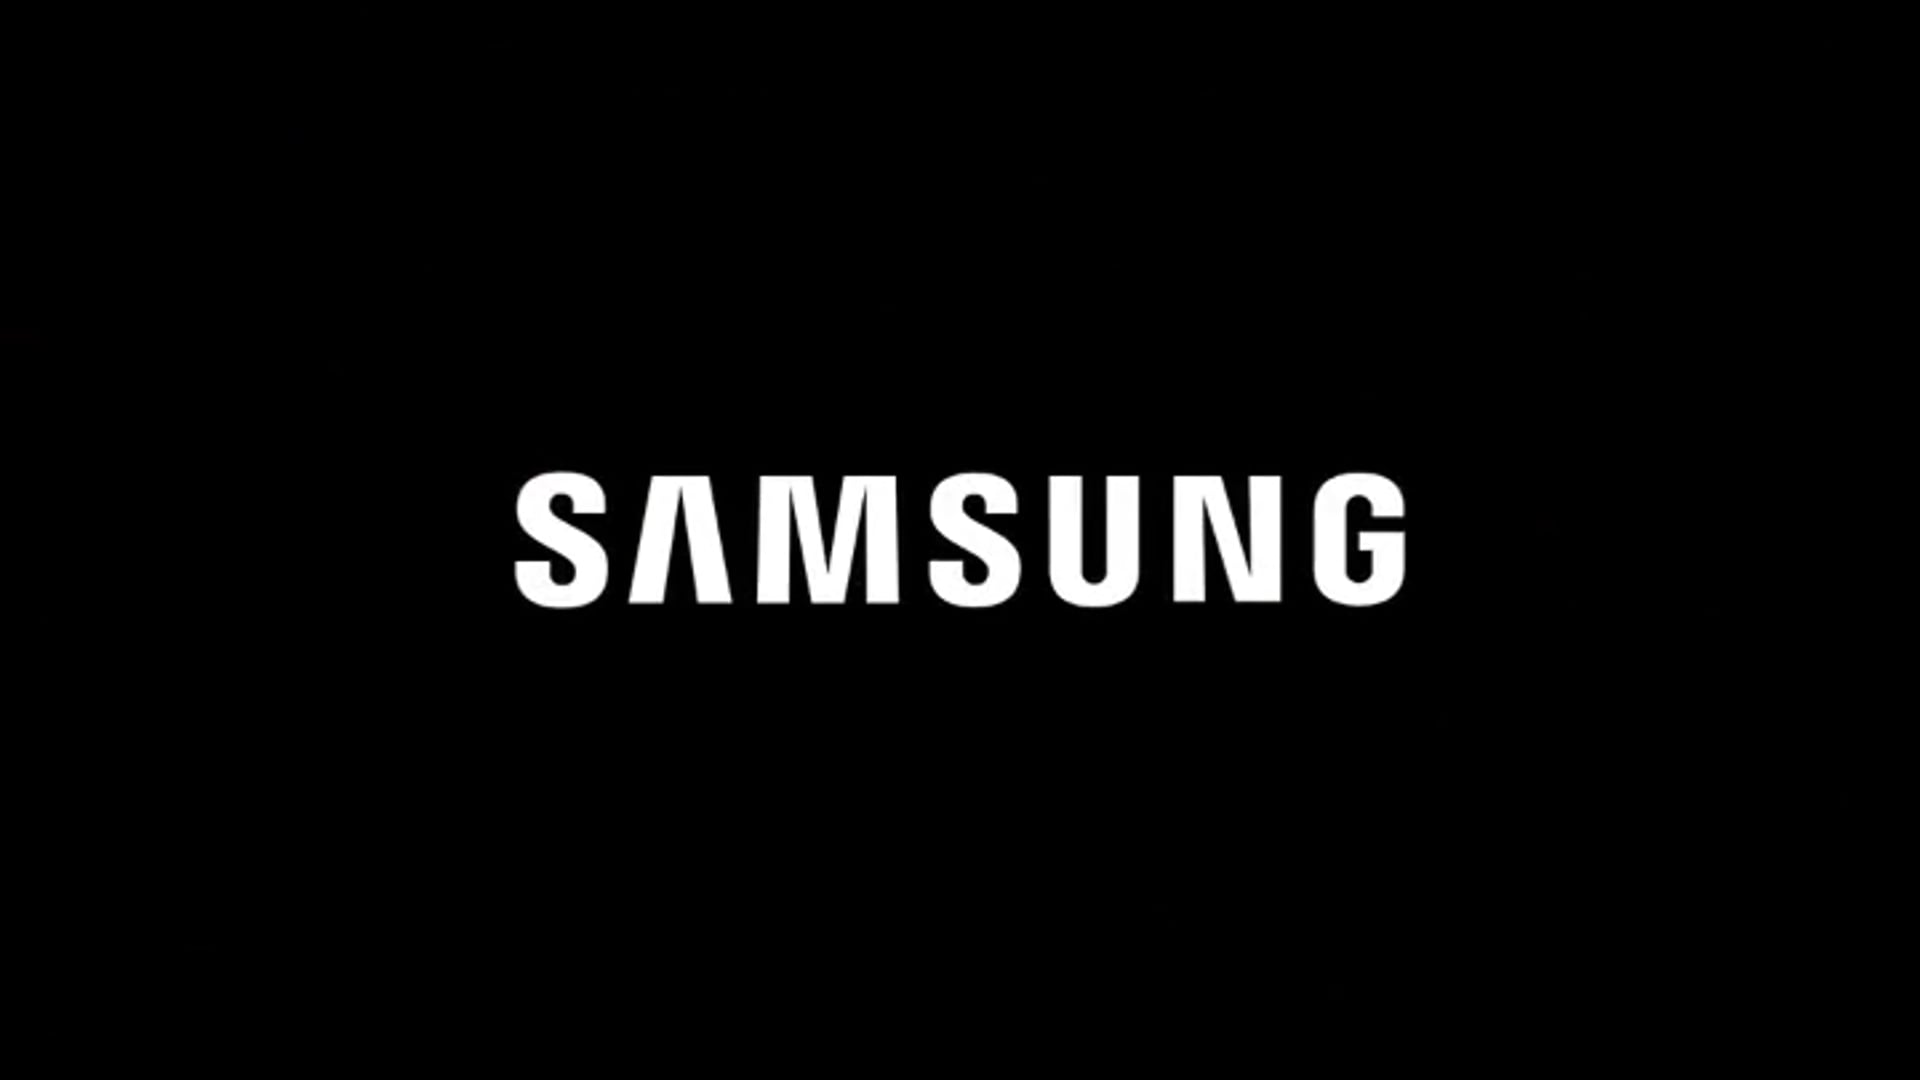 Samsung - Because We Care - “Battery”